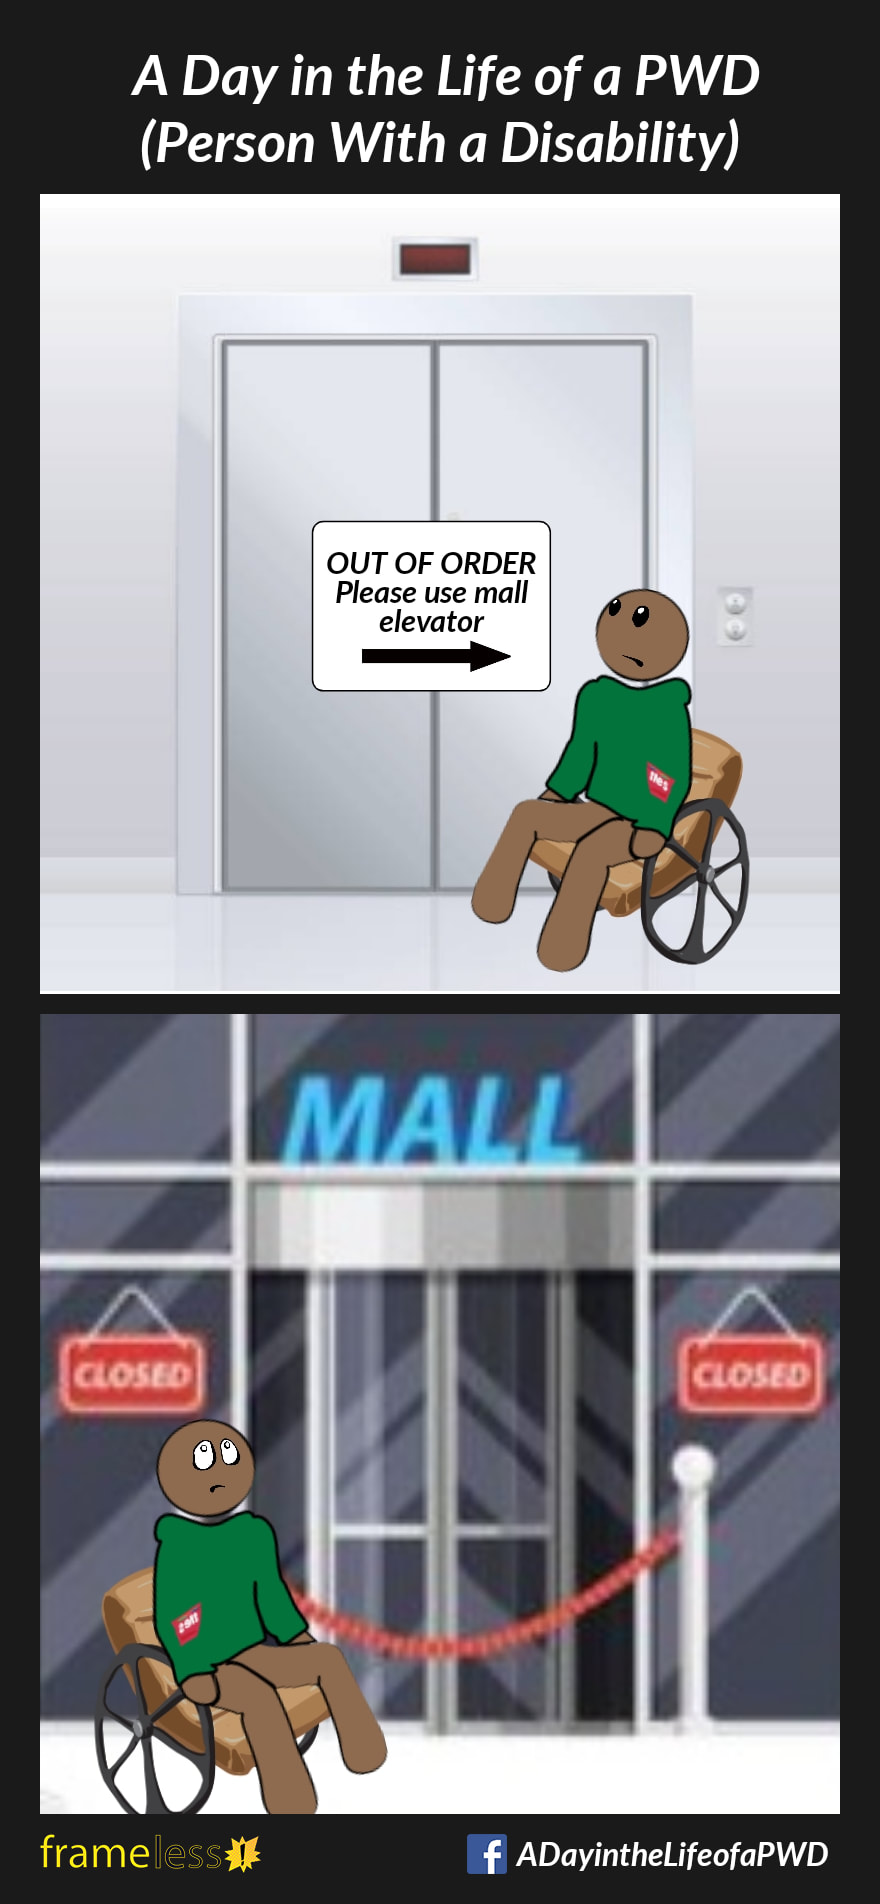 COMIC STRIP 
A Day in the Life of a PWD (Person With a Disability) 

Frame 1:
A man in a wheelchair is at an elevator.
A sign on the elevator reads:
